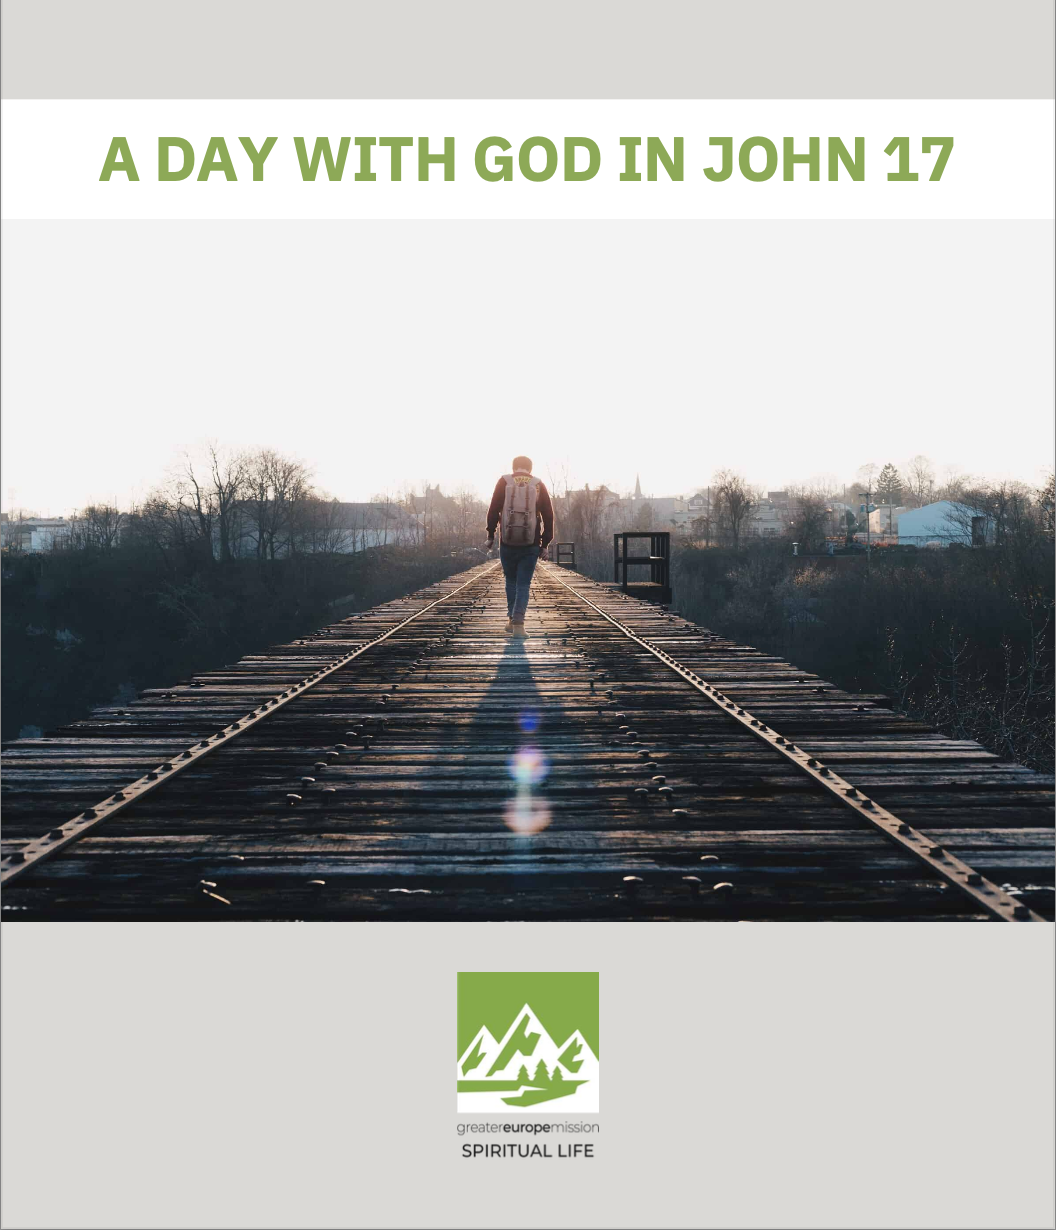 Day With God in John 17 Image